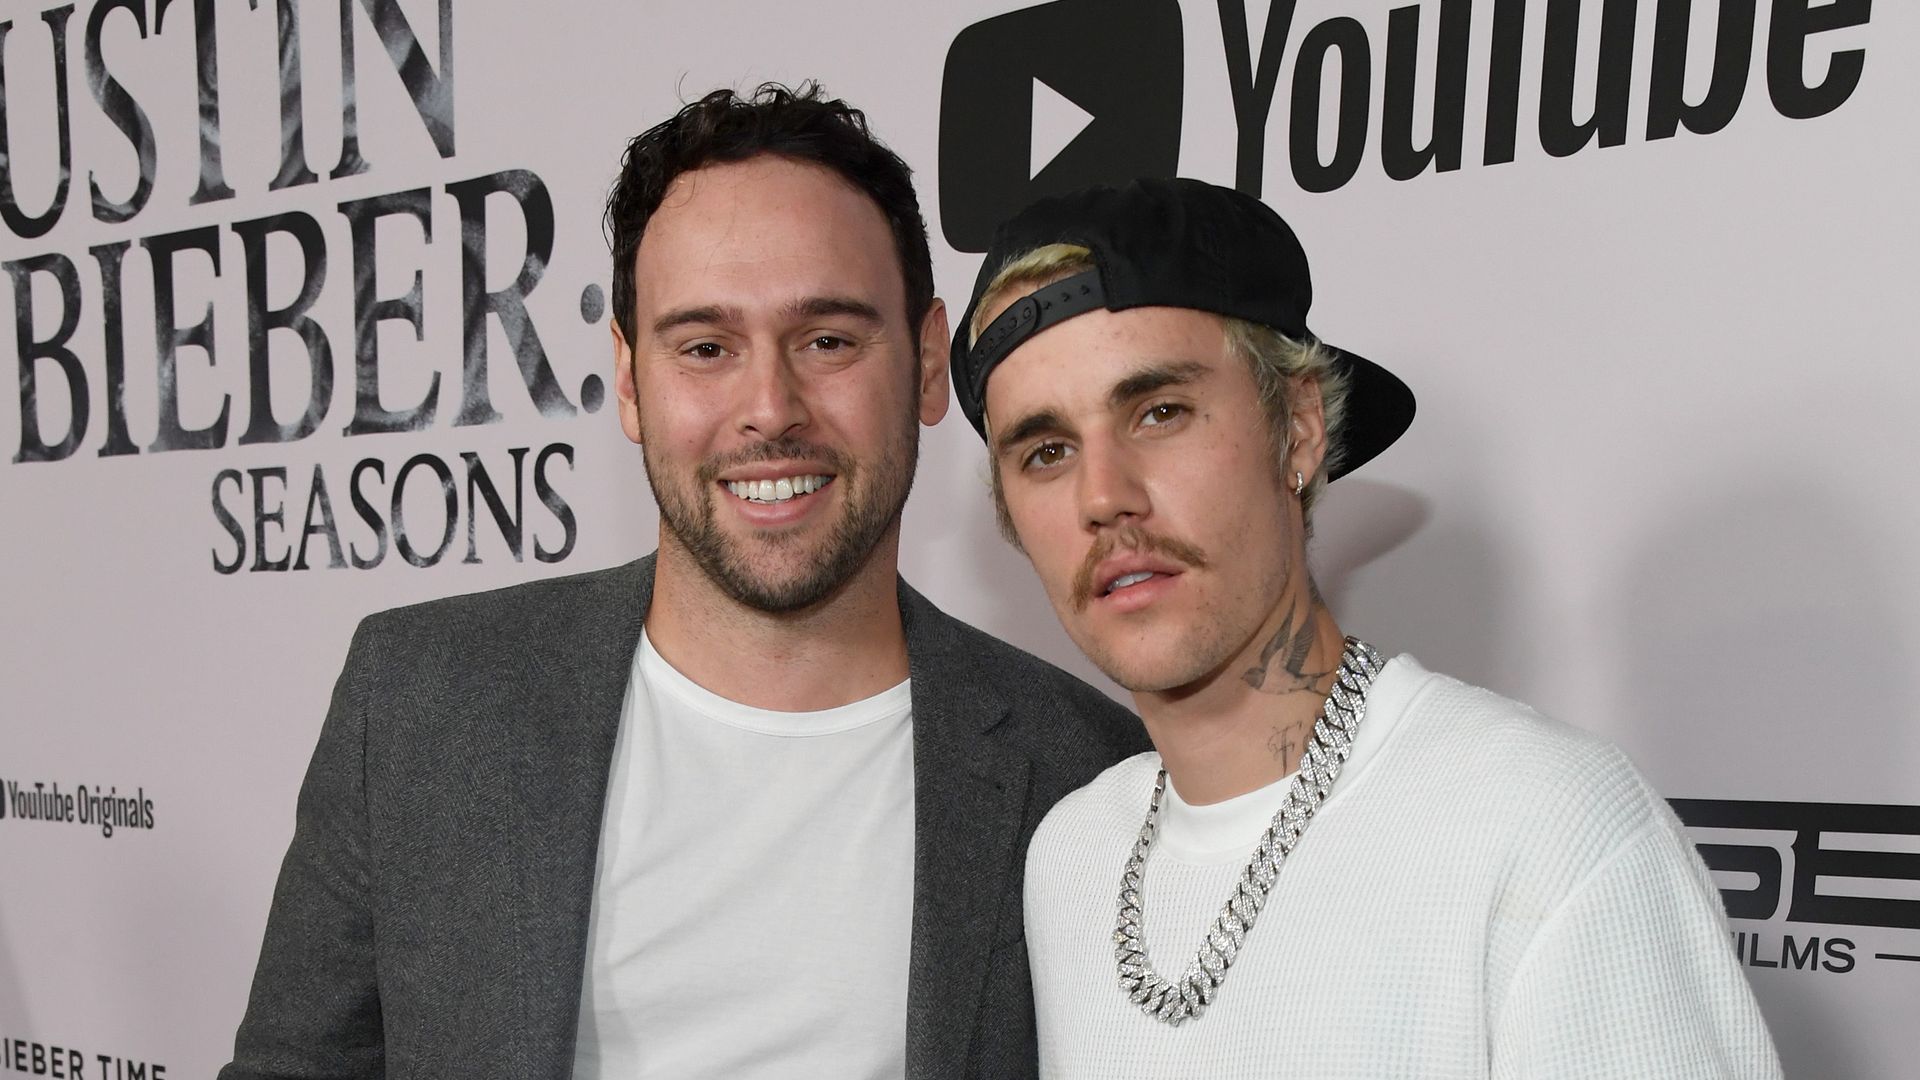 Scooter Braun and Justin Bieber attend YouTube Originals "Justin Bieber: Seasons" premiere at Regency Bruin Theater on January 27, 2020 in Westwood, California